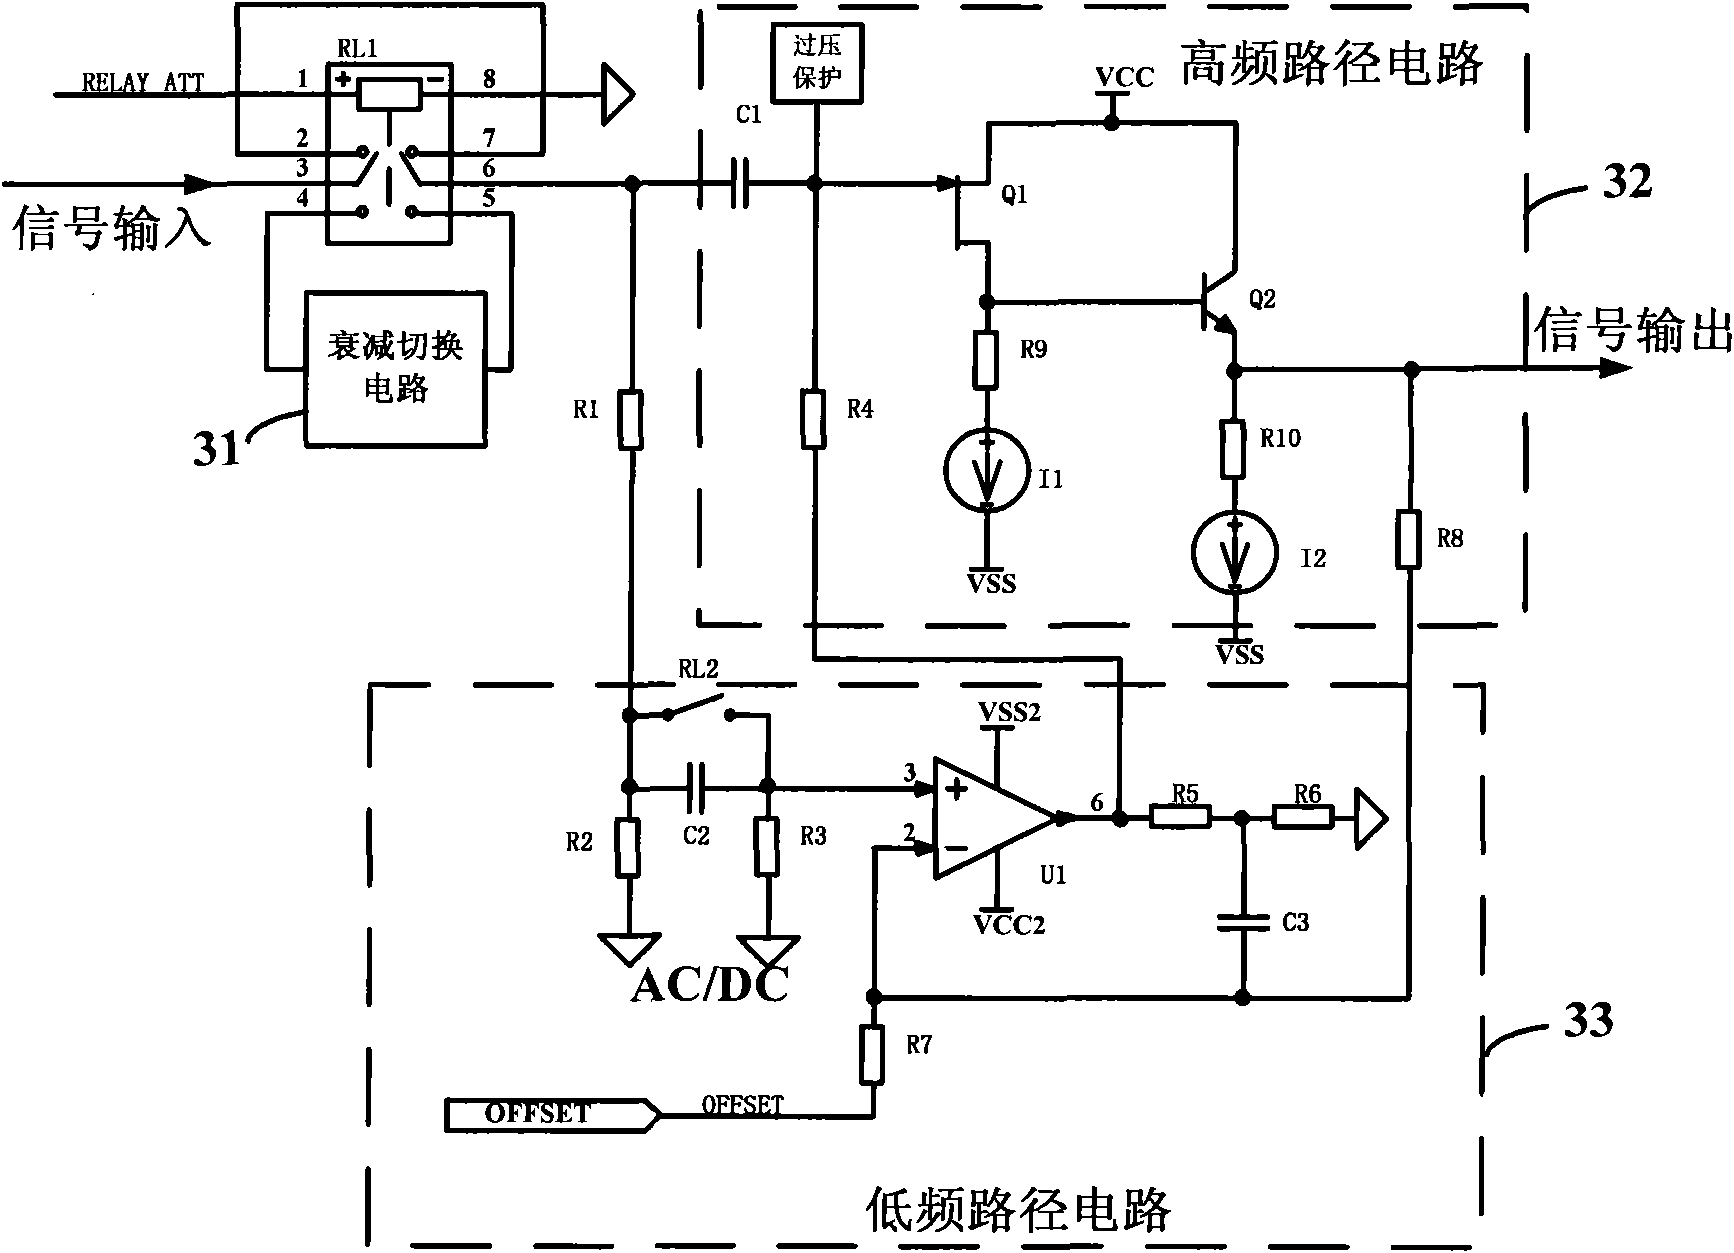 Oscilloscope with high-frequency path and low-frequency path separation circuit